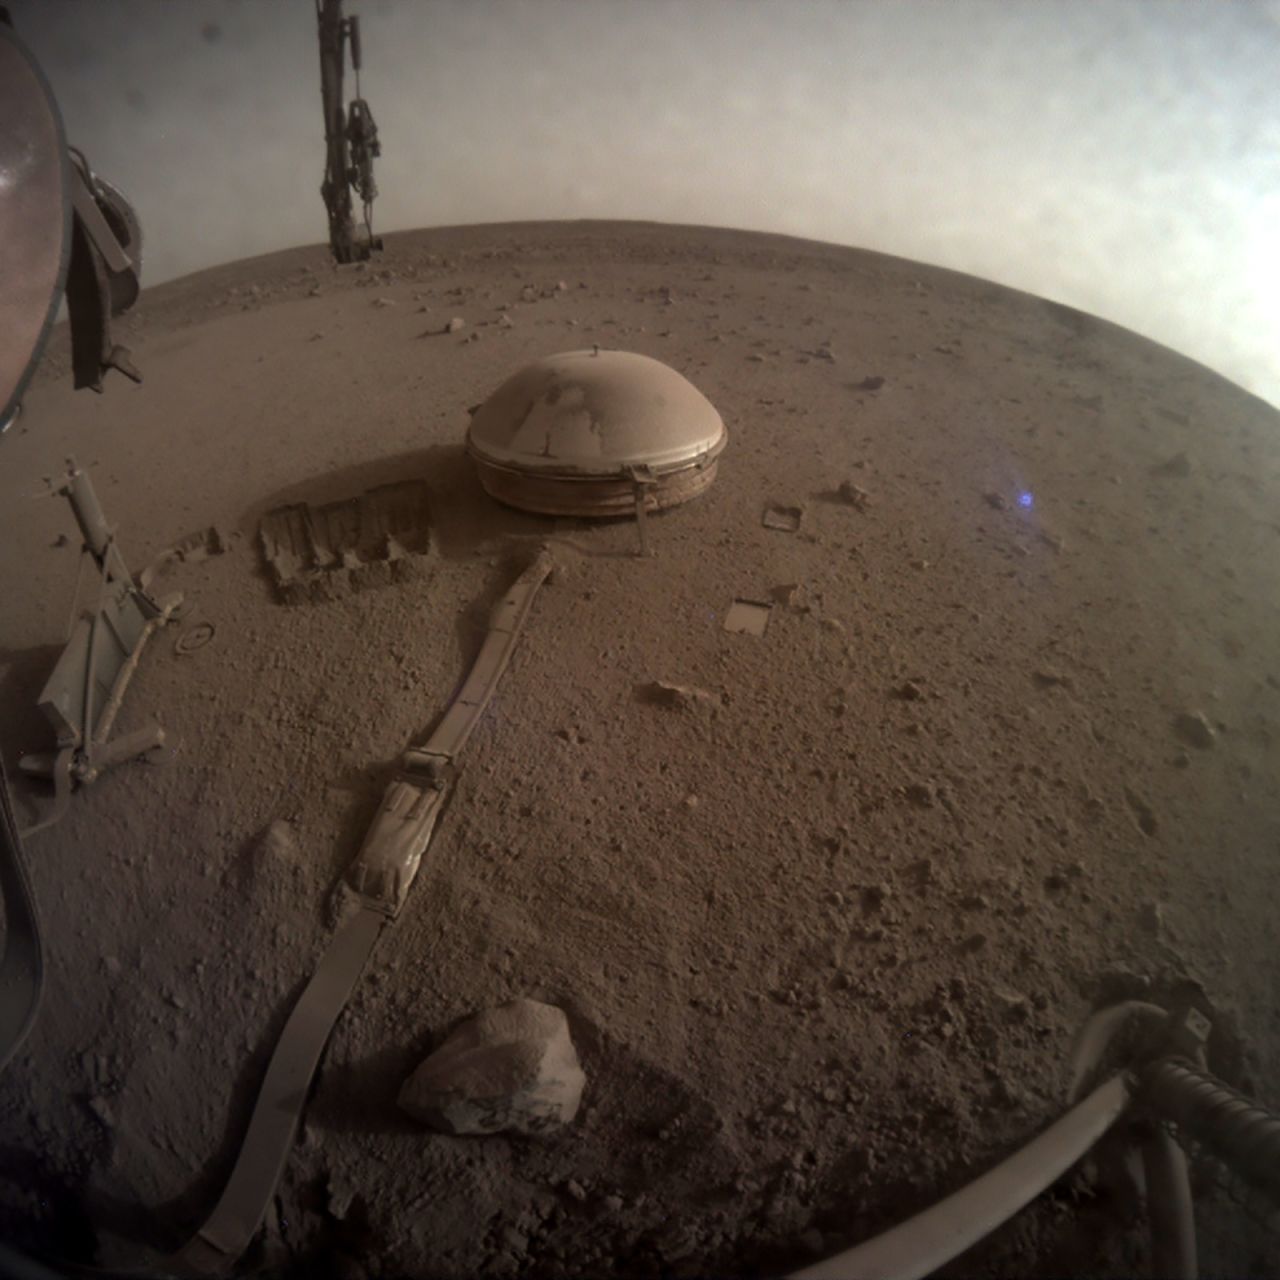 NASA's InSight Mars lander captures one final image of the red planet. "My power's really low, so this may be the last image I can send," <a href="https://twitter.com/nasainsight/status/1604955574659035136" target="_blank" target="_blank">the lander tweeted </a>on Monday, December 19. The space agency <a href="https://www.cnn.com/2022/12/21/world/nasa-insight-mars-mission-end-scn/index.html" target="_blank">announced the official end</a> of the mission on December 21 after the lander failed to respond to two messages from mission control at NASA's Jet Propulsion Laboratory in Pasadena, California. 